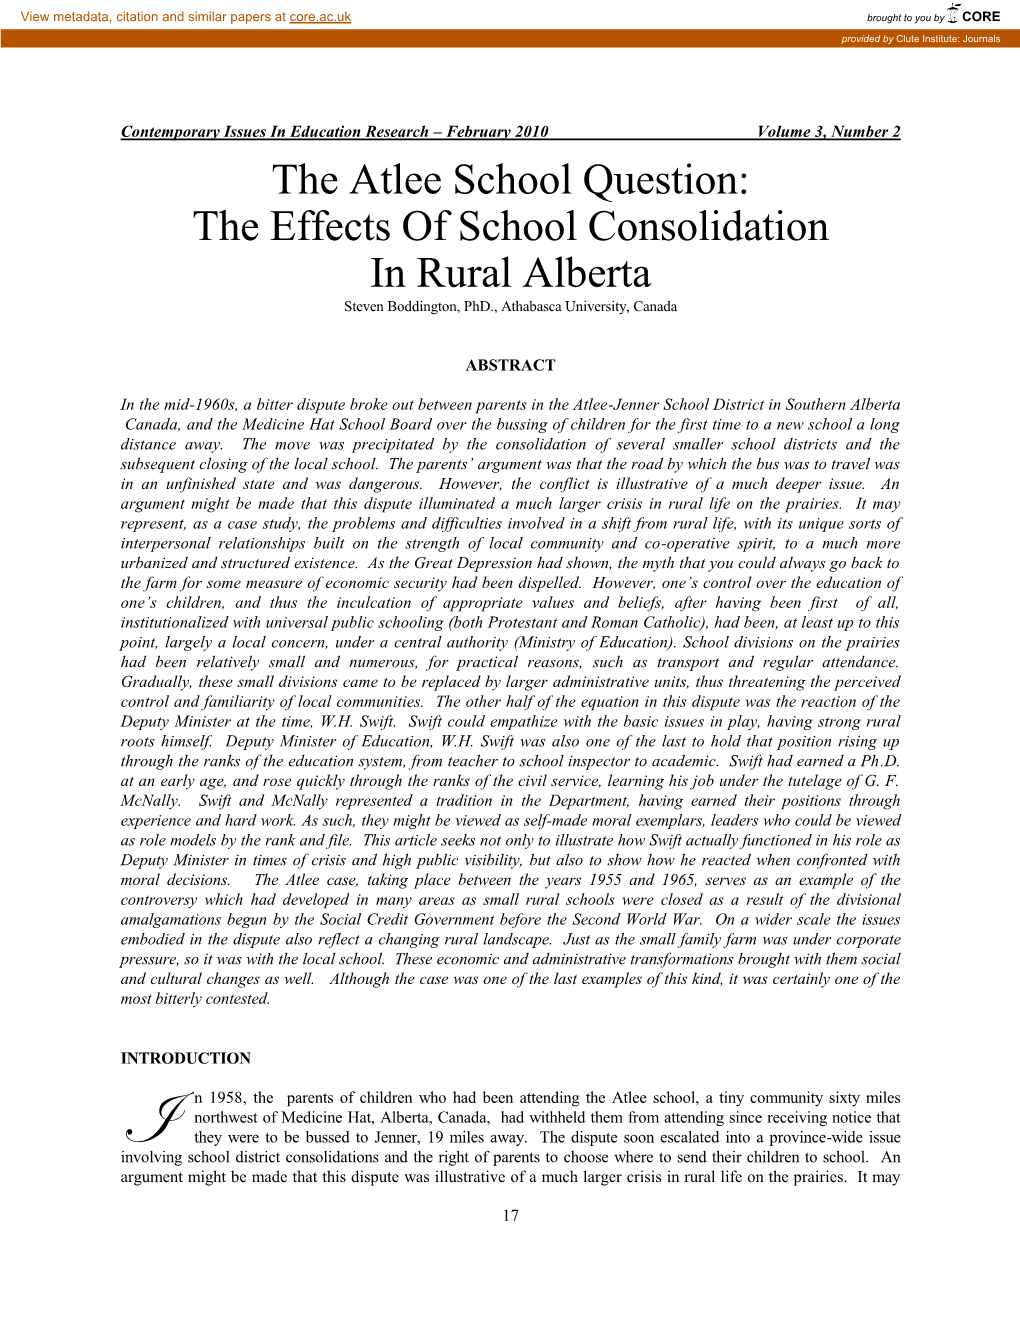 The Atlee School Question: the Effects of School Consolidation in Rural Alberta Steven Boddington, Phd., Athabasca University, Canada